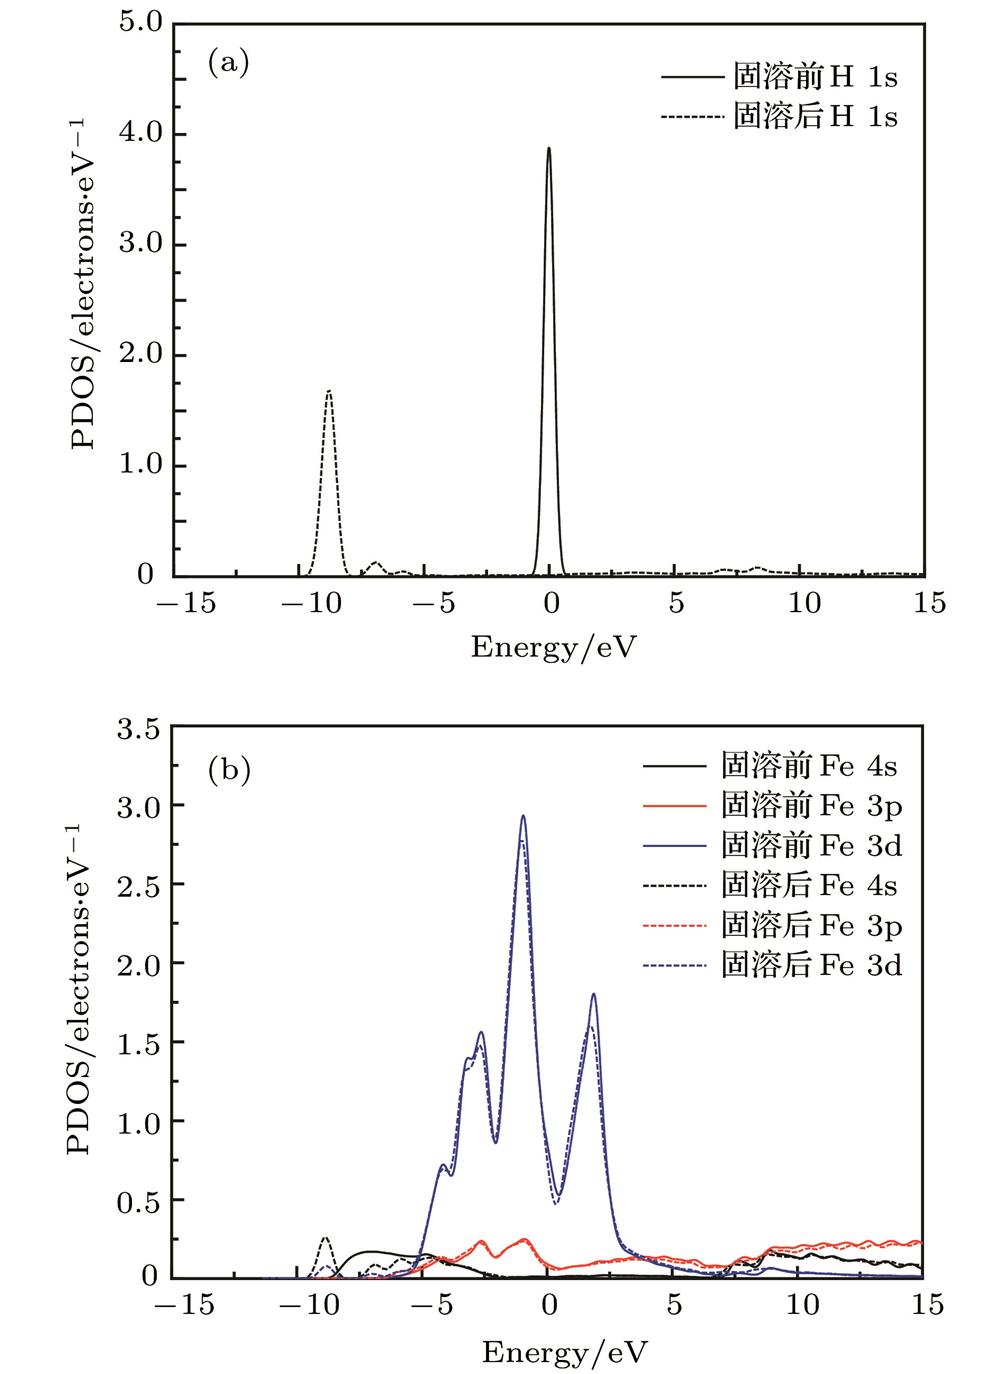 Partial electronic density of state of α-Fe+H (T-site): (a) Free H atom and interstitial H atom; (b) Fe atom in perfect α-Fe crystal and the nearest neighbour of interstitial H atom; (c) H atom in tetrahedral interstice; (d) the nearest neighbour Fe atom of interstitial H atom.